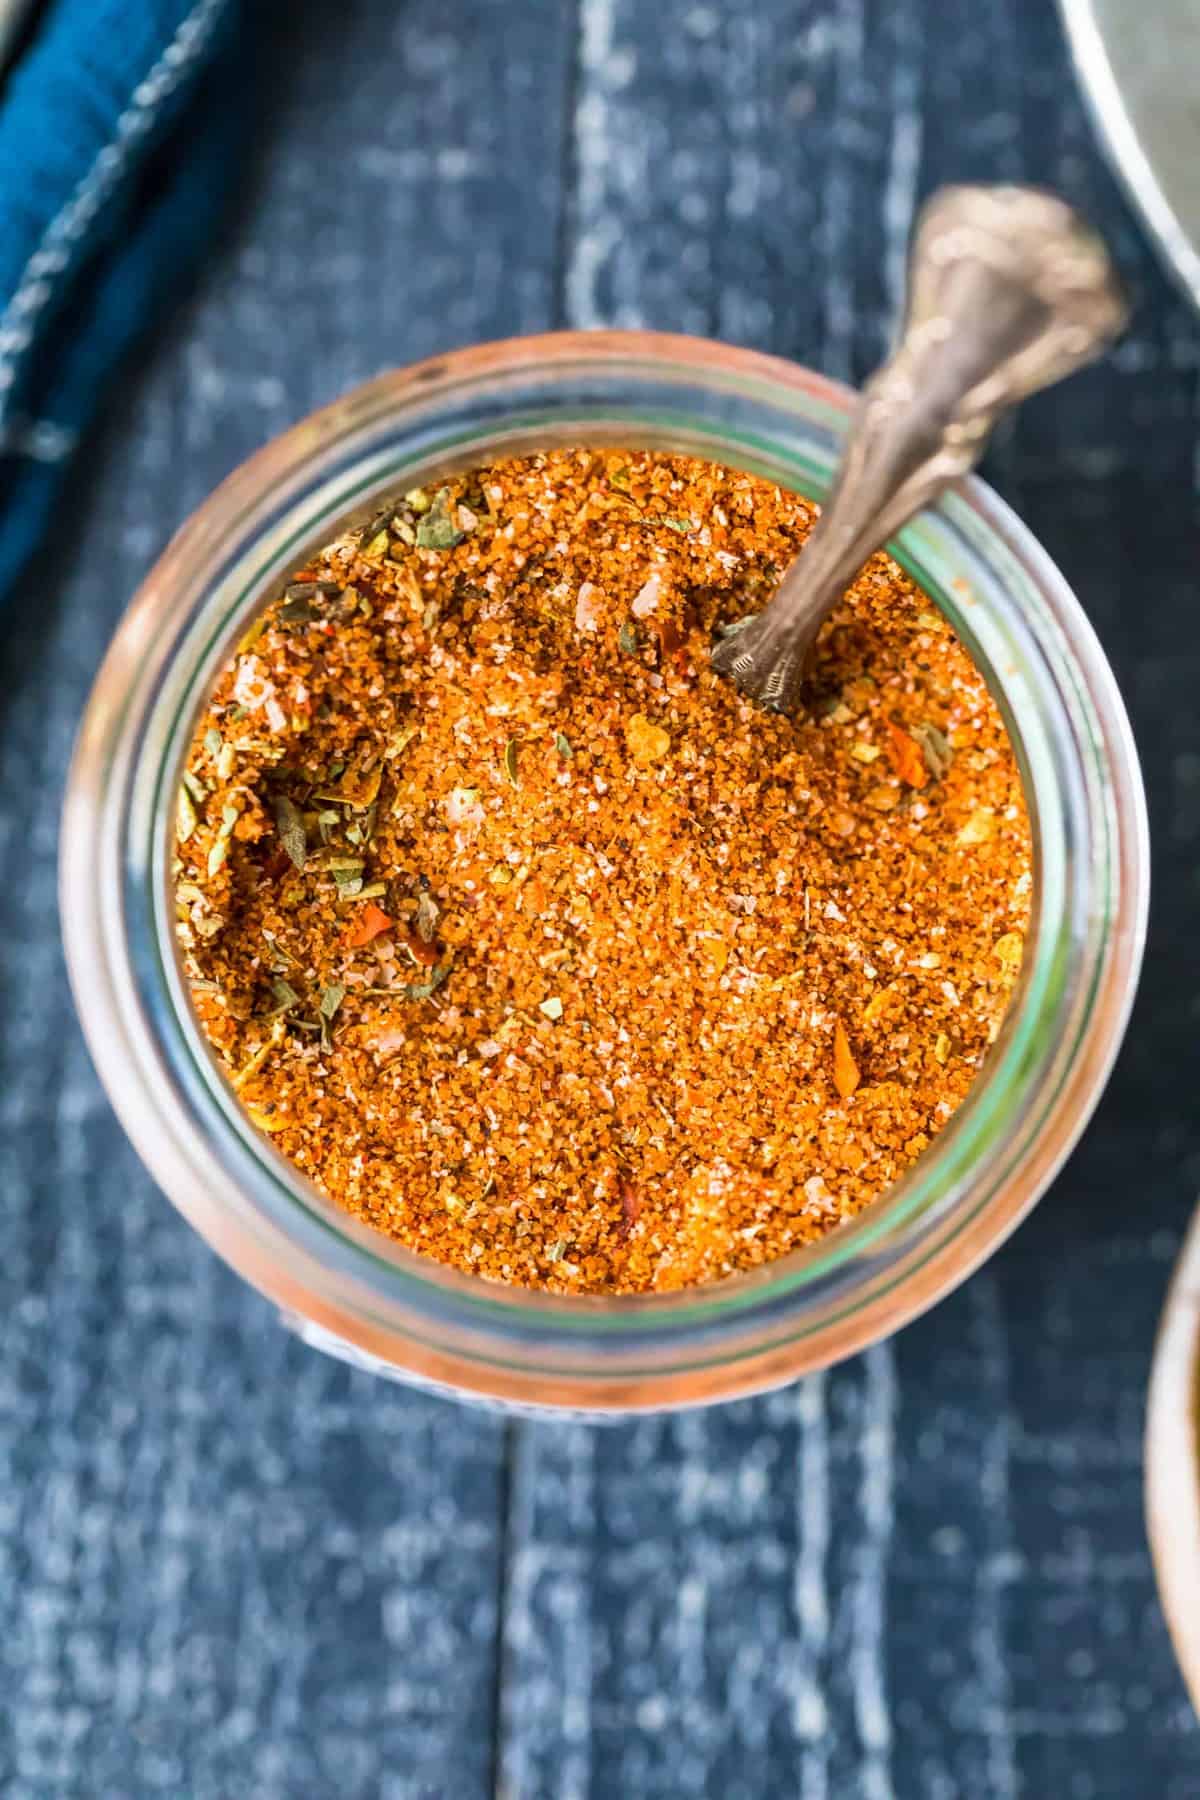 A spoon in a jar of mixed spices